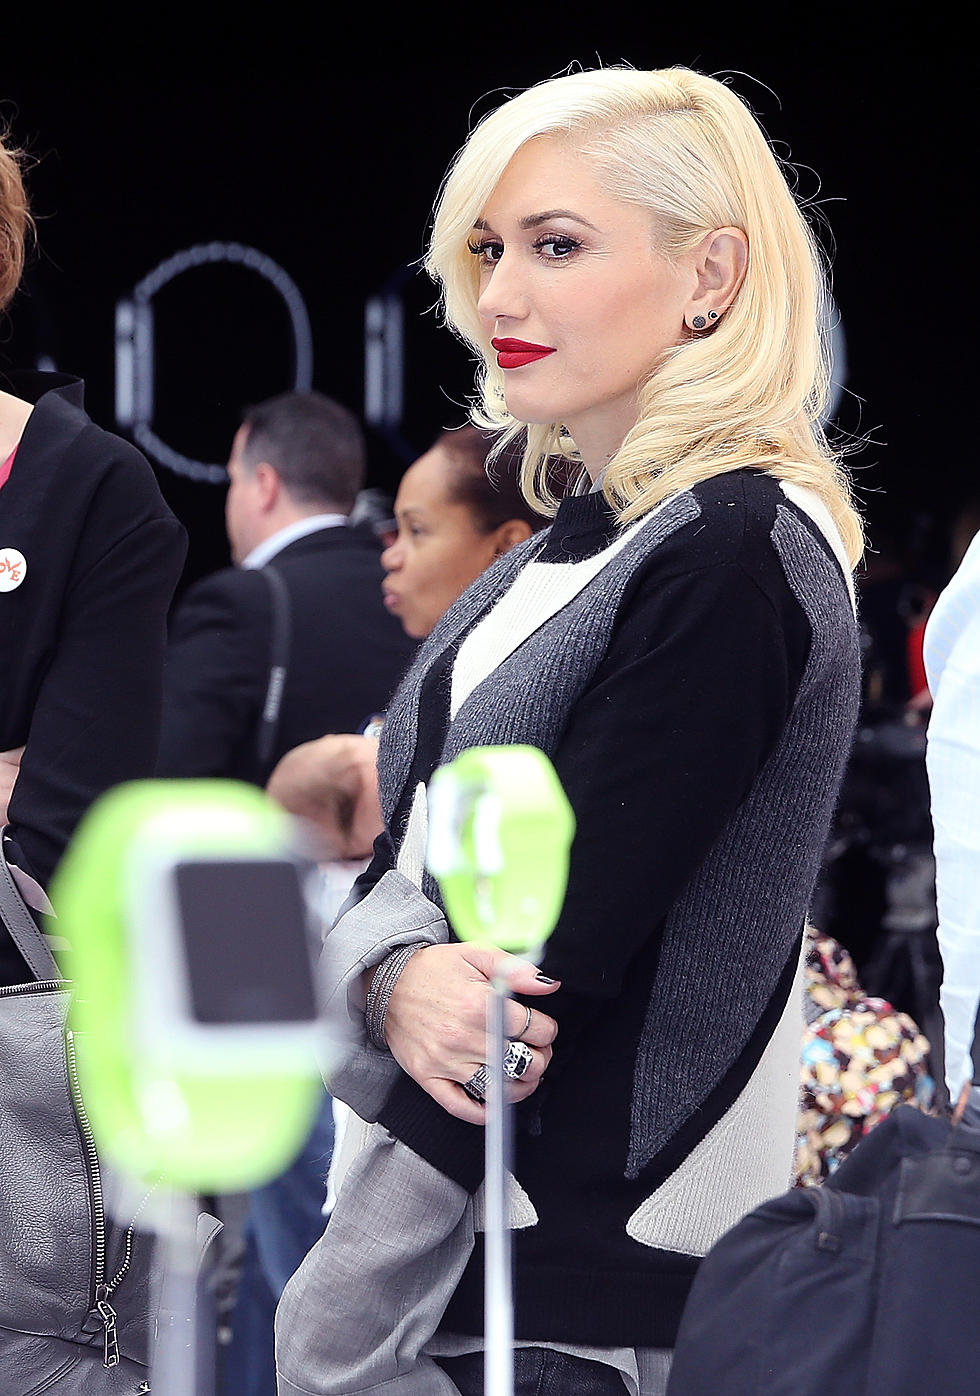 Gwen Stefani Talks About ‘The Voice’ and New Music on Kidd Kraddick Show